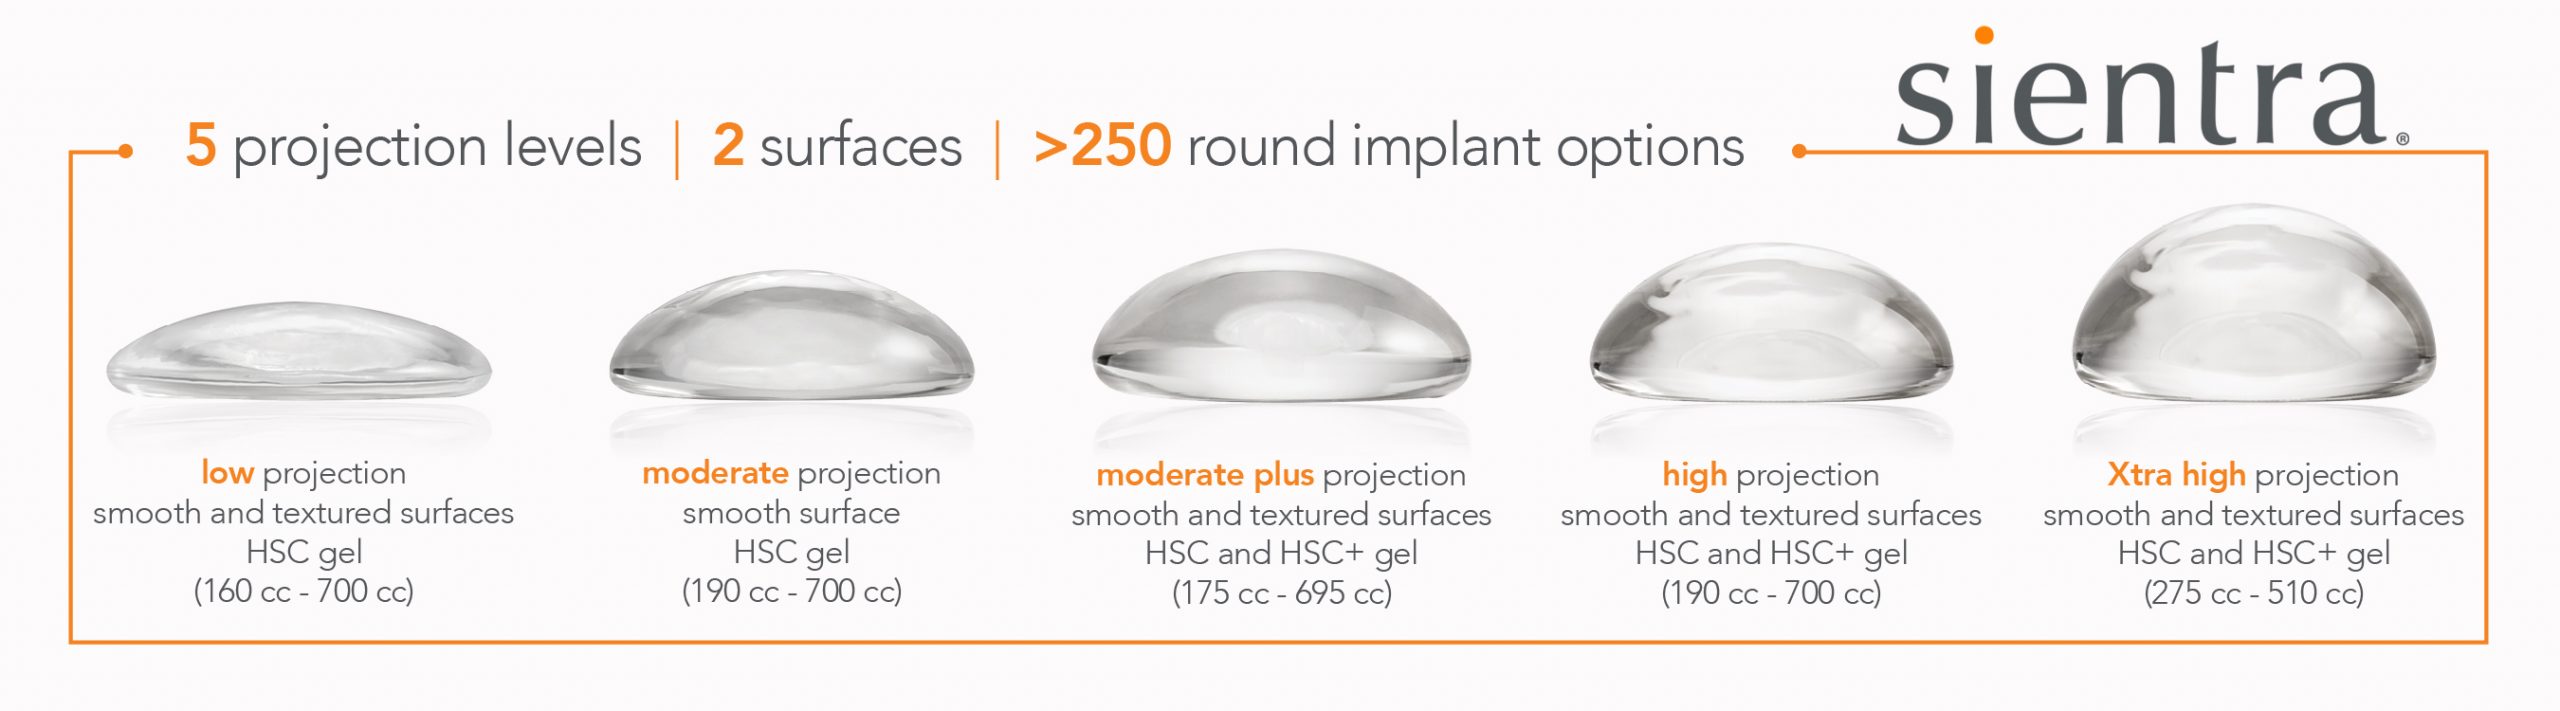 BREAST AUGMENTATION WITH MICRO-TEXTURED ARION IMPLANTS IS EFFECTIVE AND SAFE